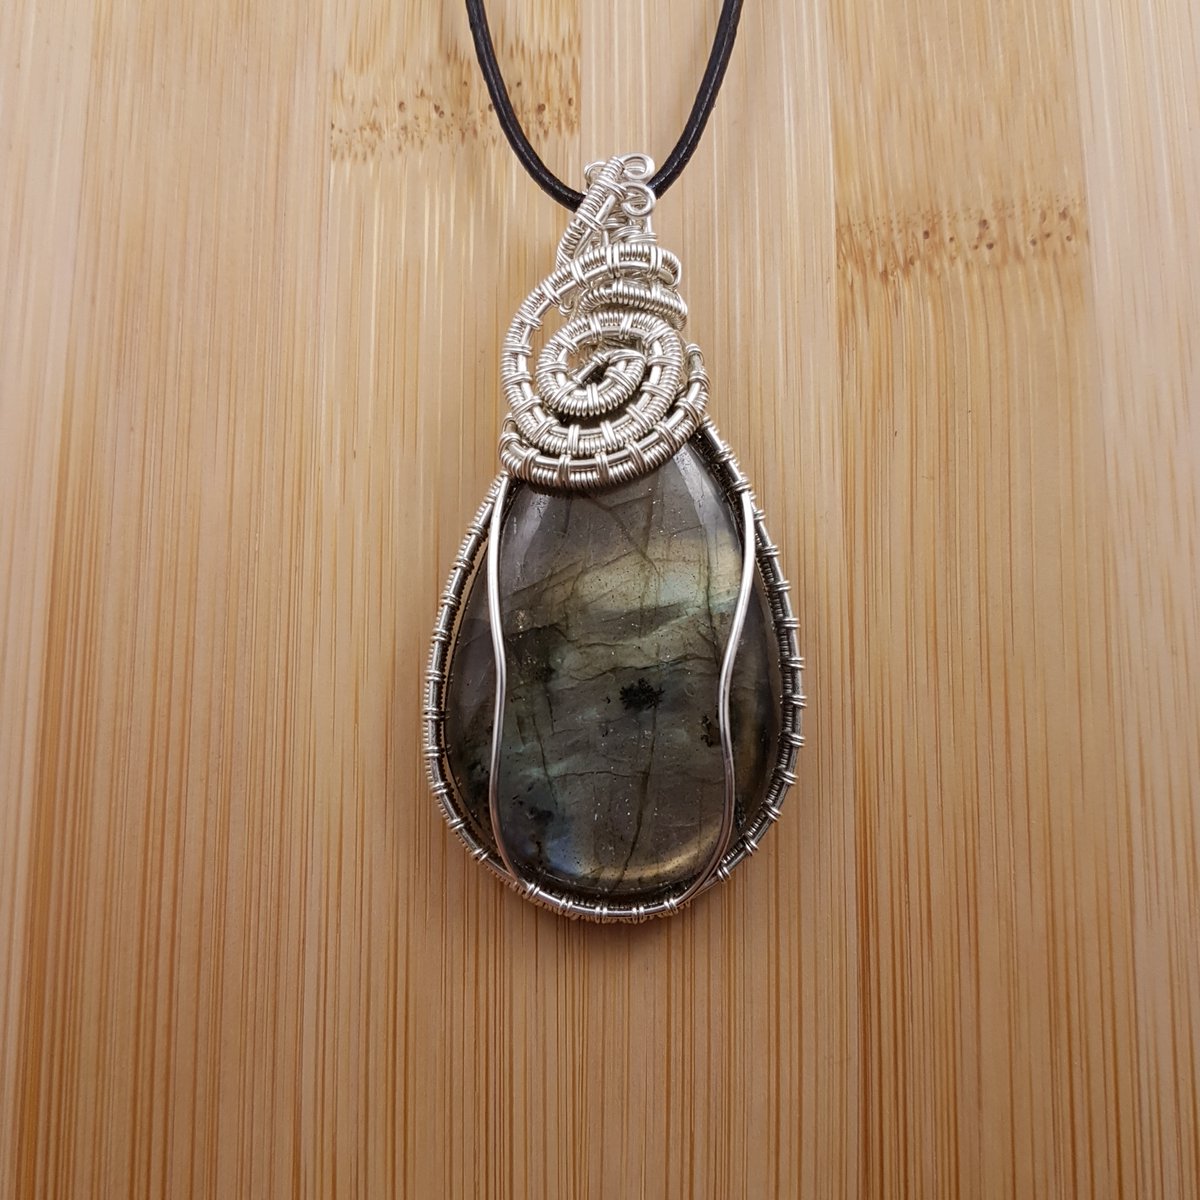 I'll wrap up the week here, before I go through every soul in the store.There are 27 labradorite pendants to choose from, and I need your help finding them homes:  https://www.etsy.com/shop/oishiny/?section_id=28088202Free international shipping included. #Halloween  #EtsyShop  #ShopIndie  #SmallBiz